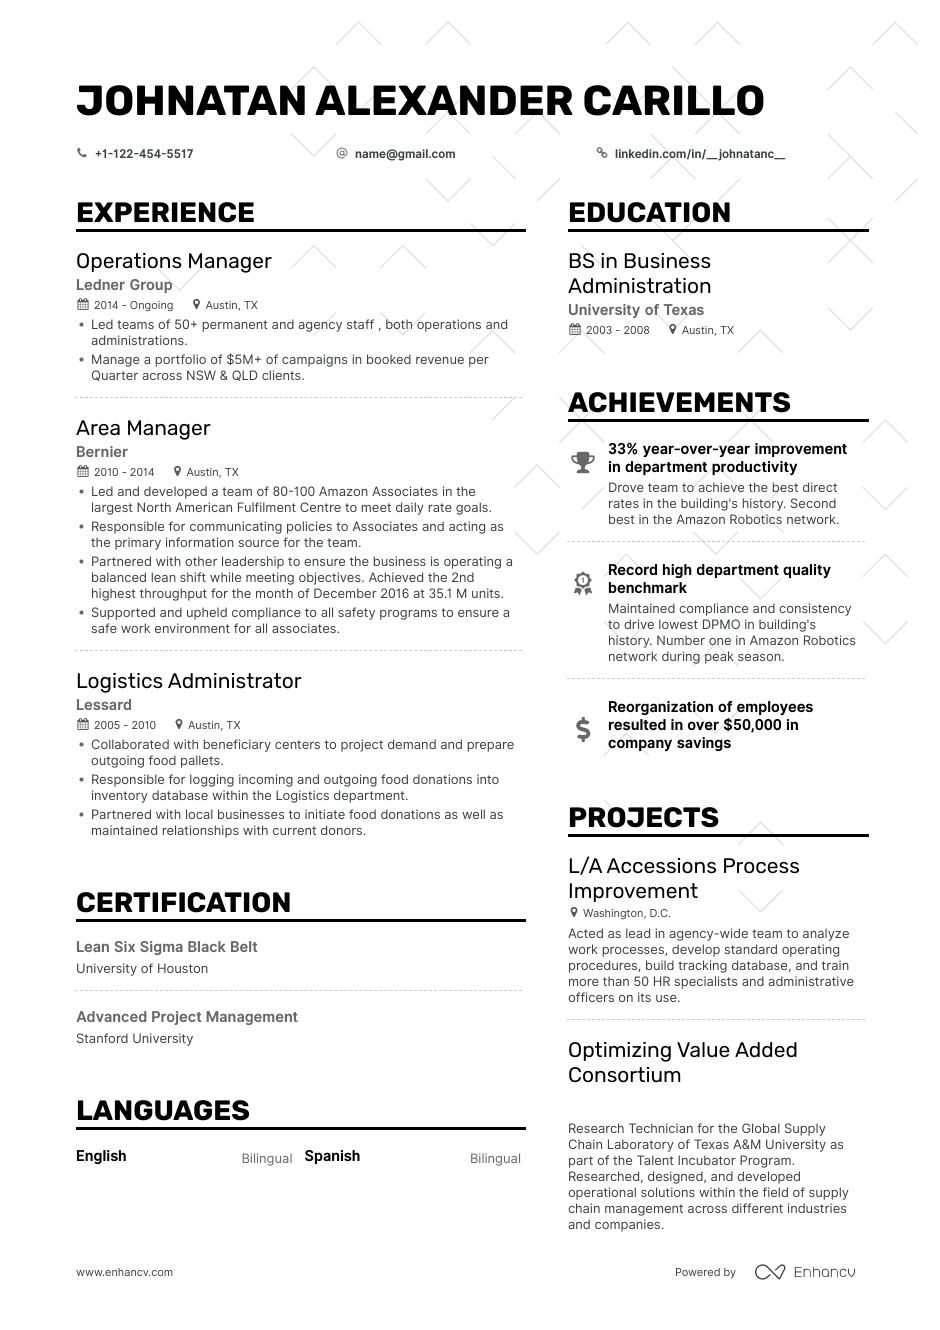 operations manager resume 8step ultimate guide for 2021